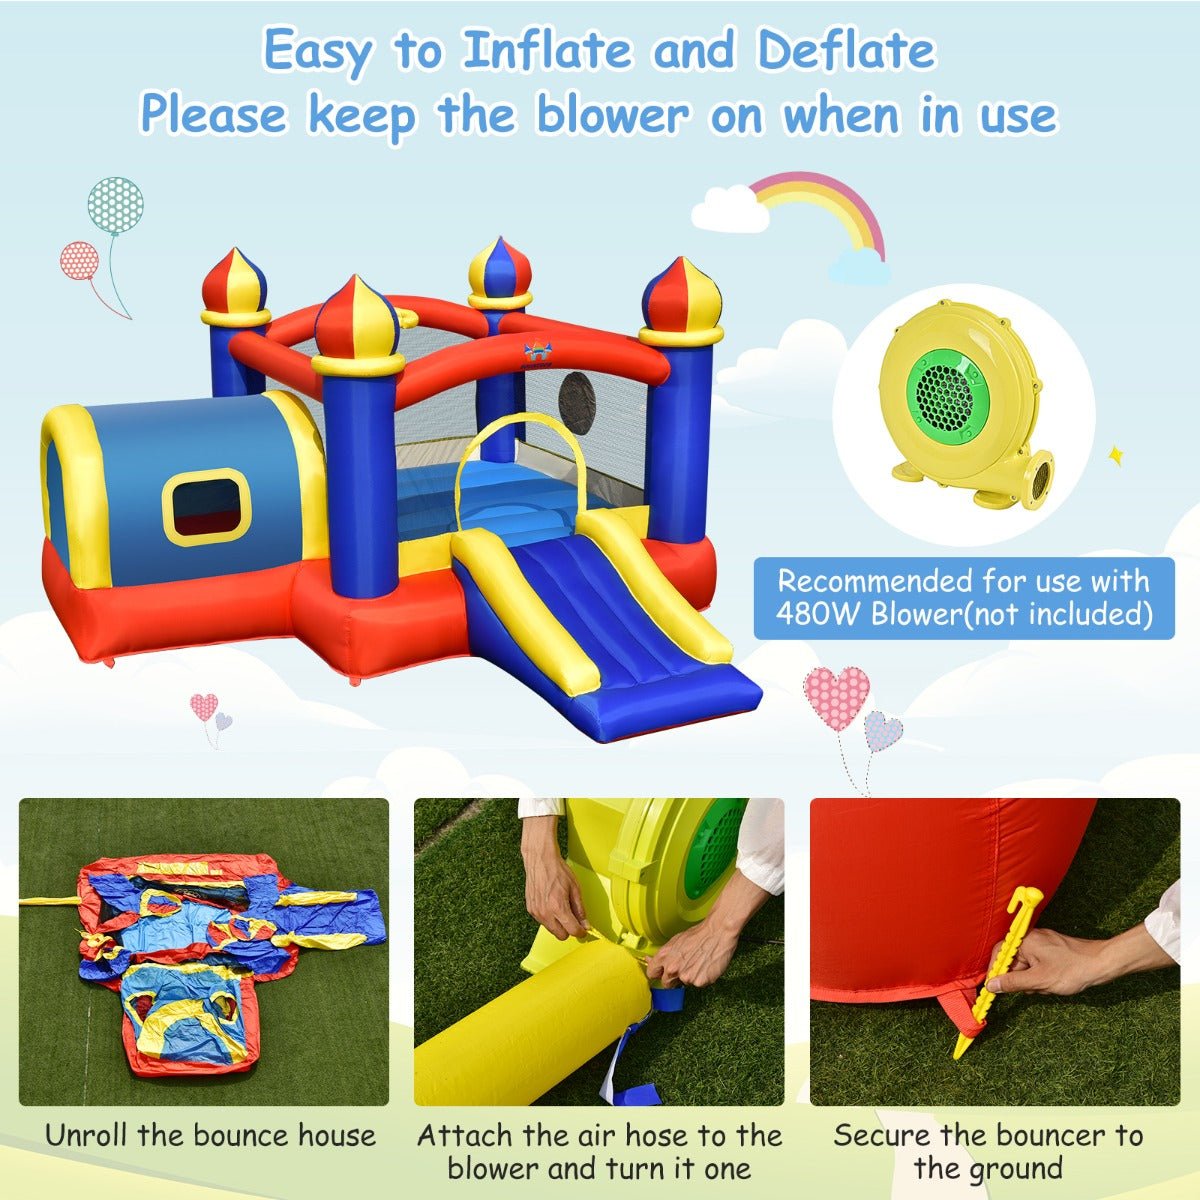 Children's 5-in-1 Inflatable Playhouse with Slide - Outdoor Joy Unleashed